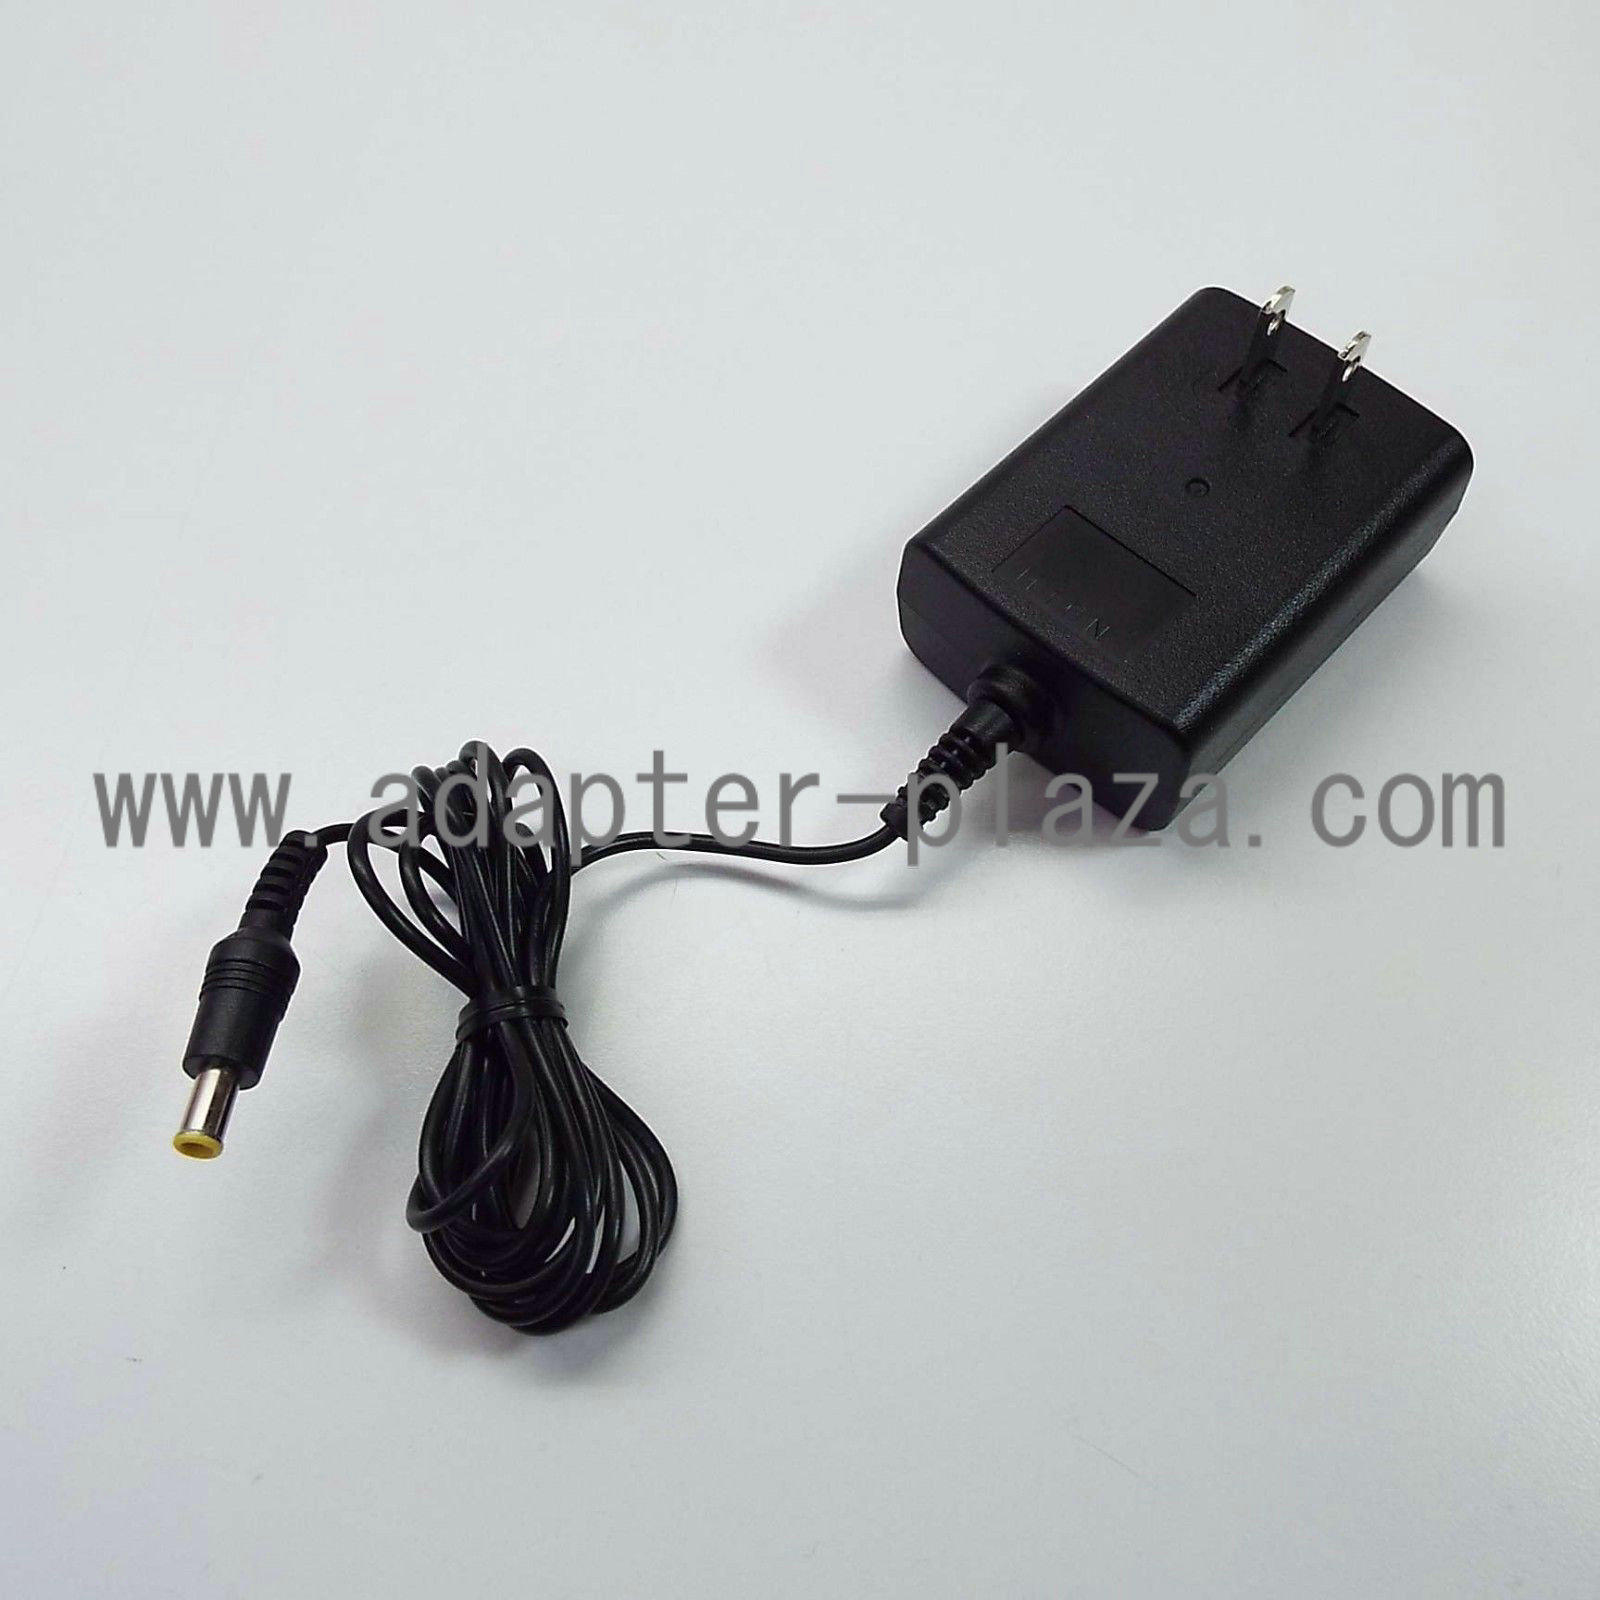 *Brand NEW* SONY AC-M1210UC 1-493-089-11 12v 1A AC DC Adapter POWER SUPPLY